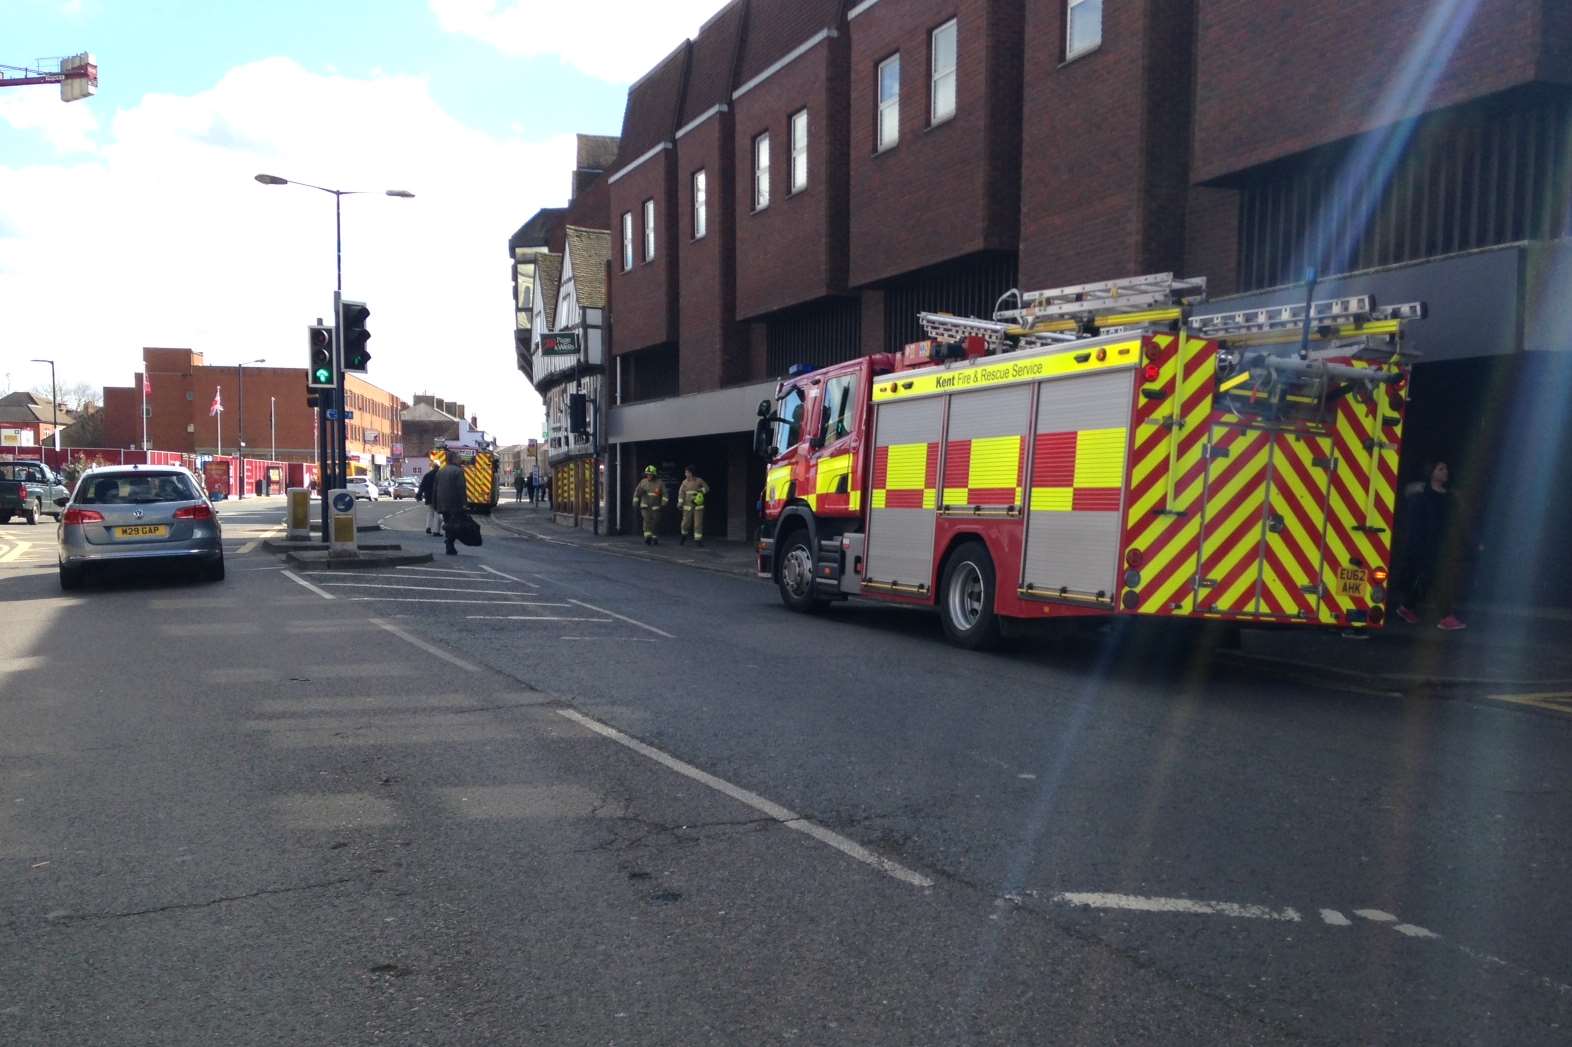 Firefighters were called to King Street at about 11.30am today.